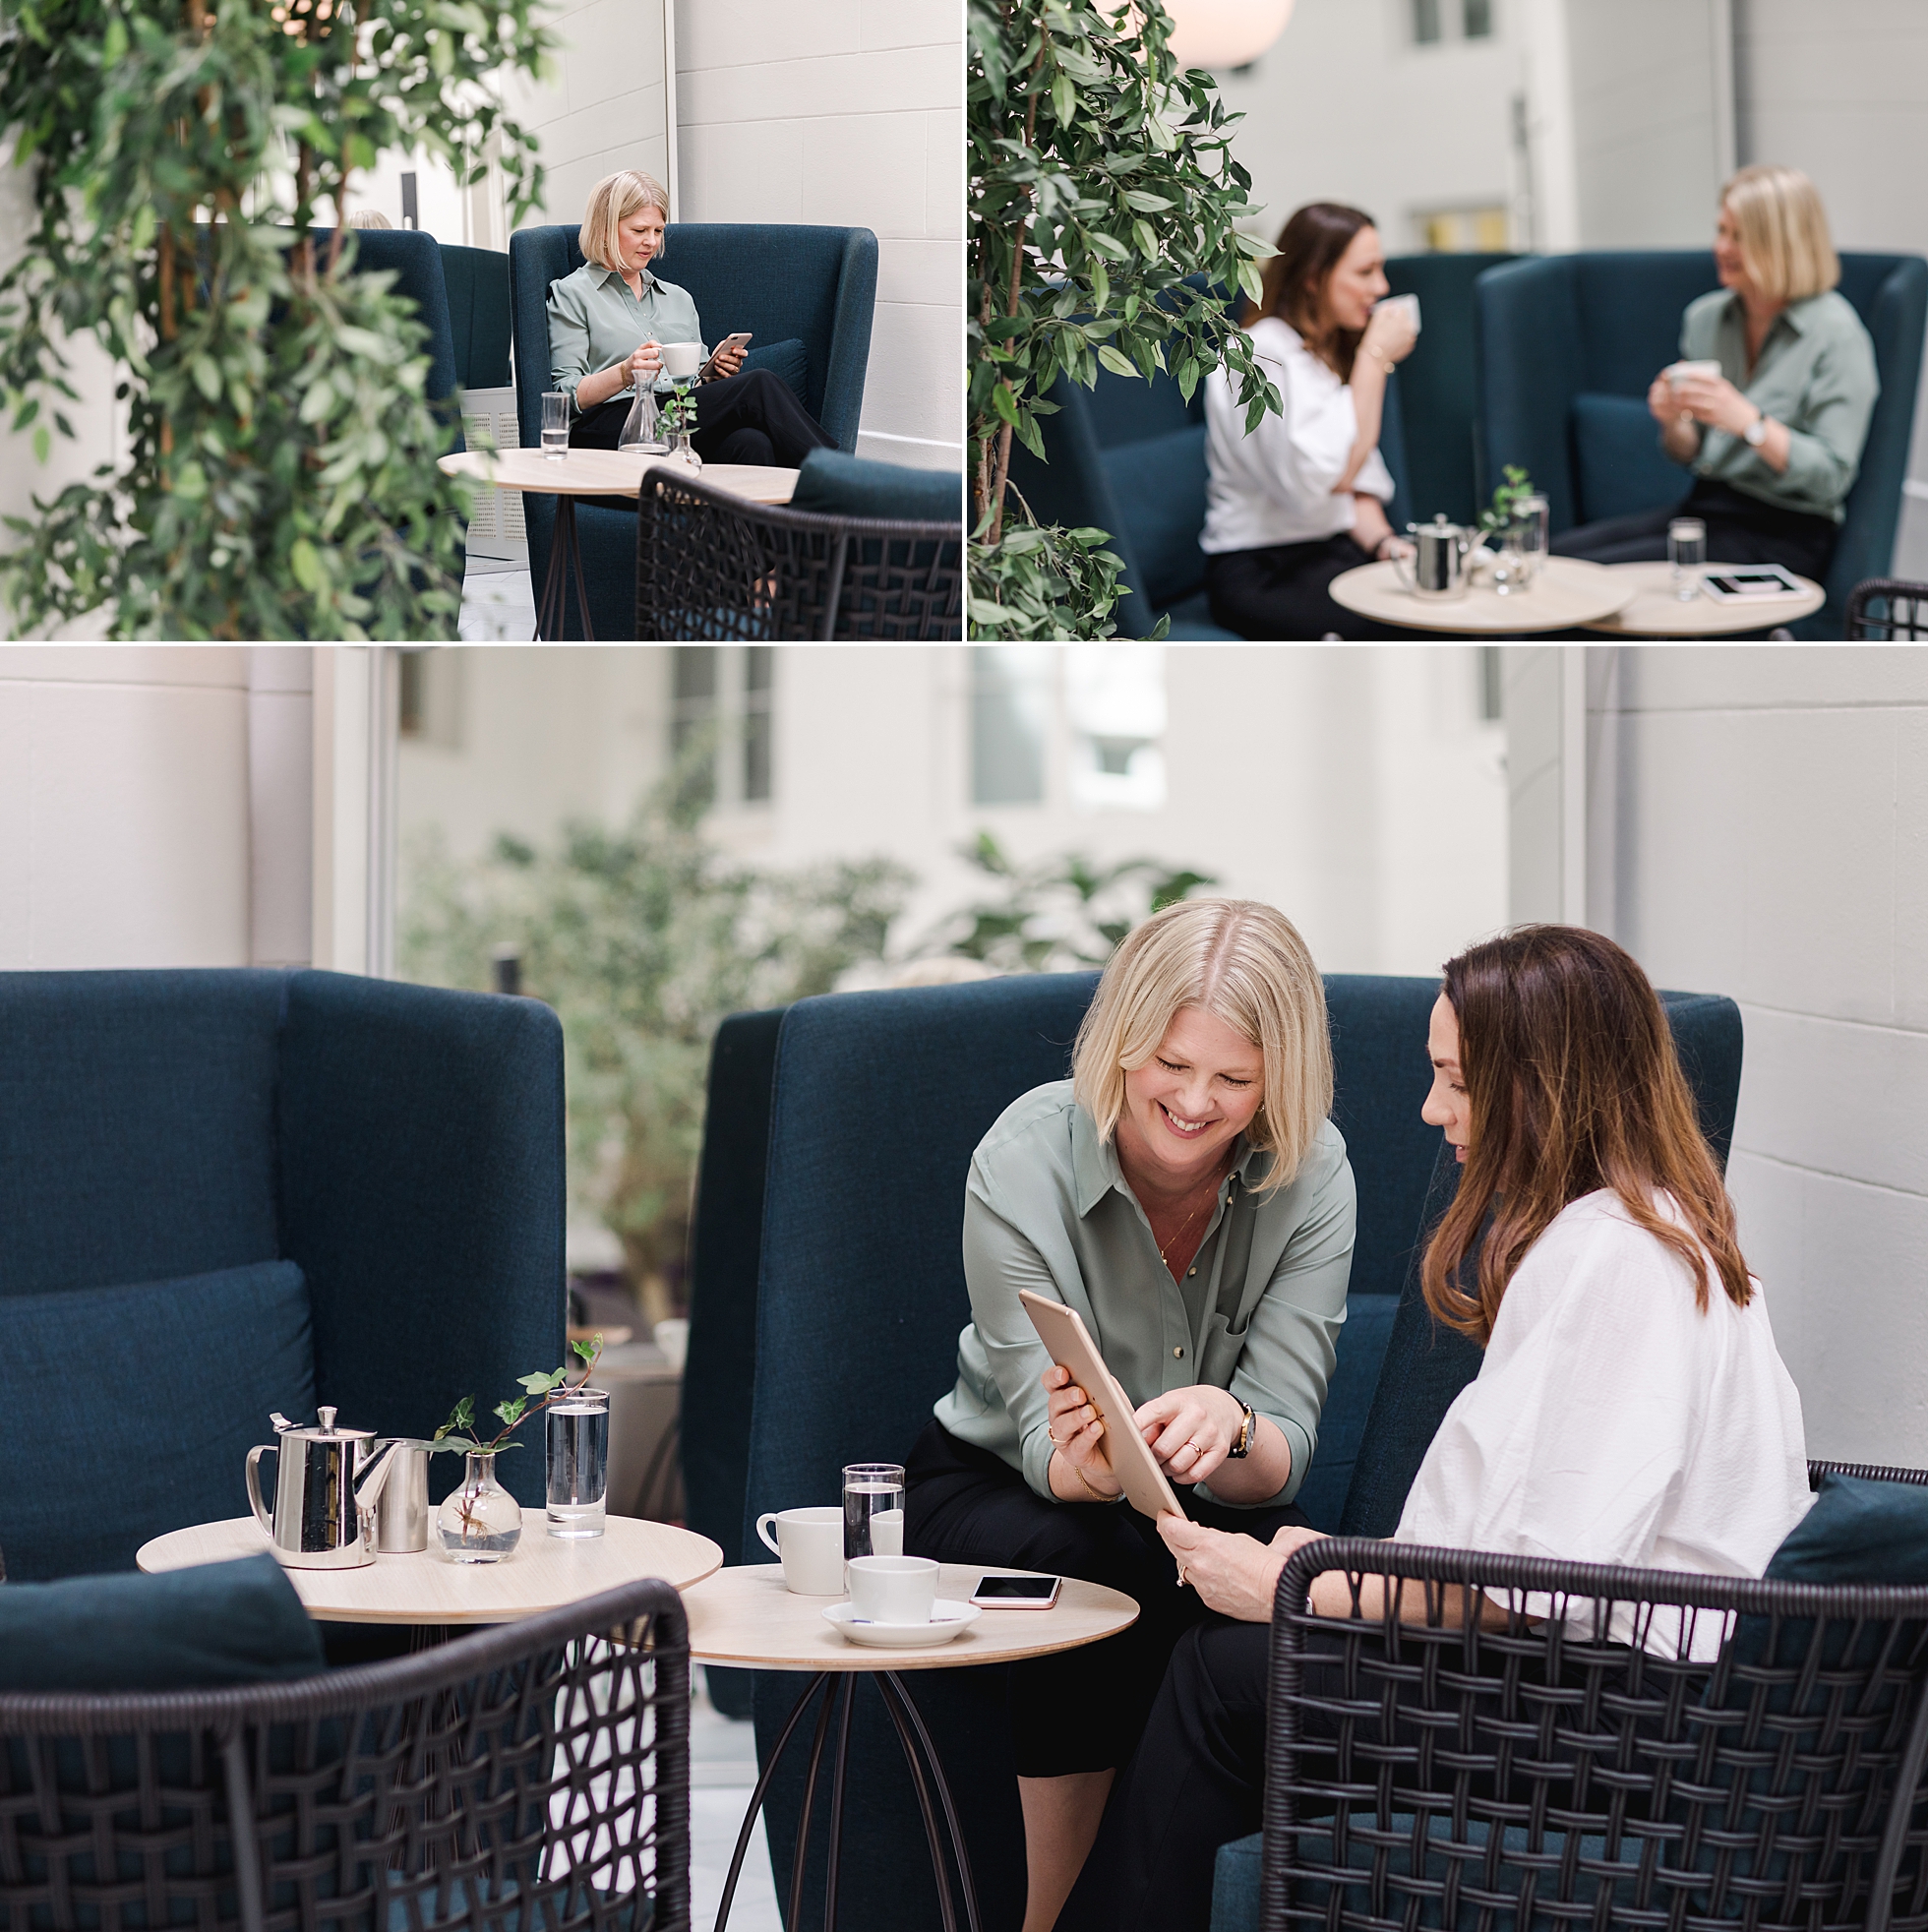 Personal brand photos of Christine Ljungberg in a consultation with a client at Hotel Nobis